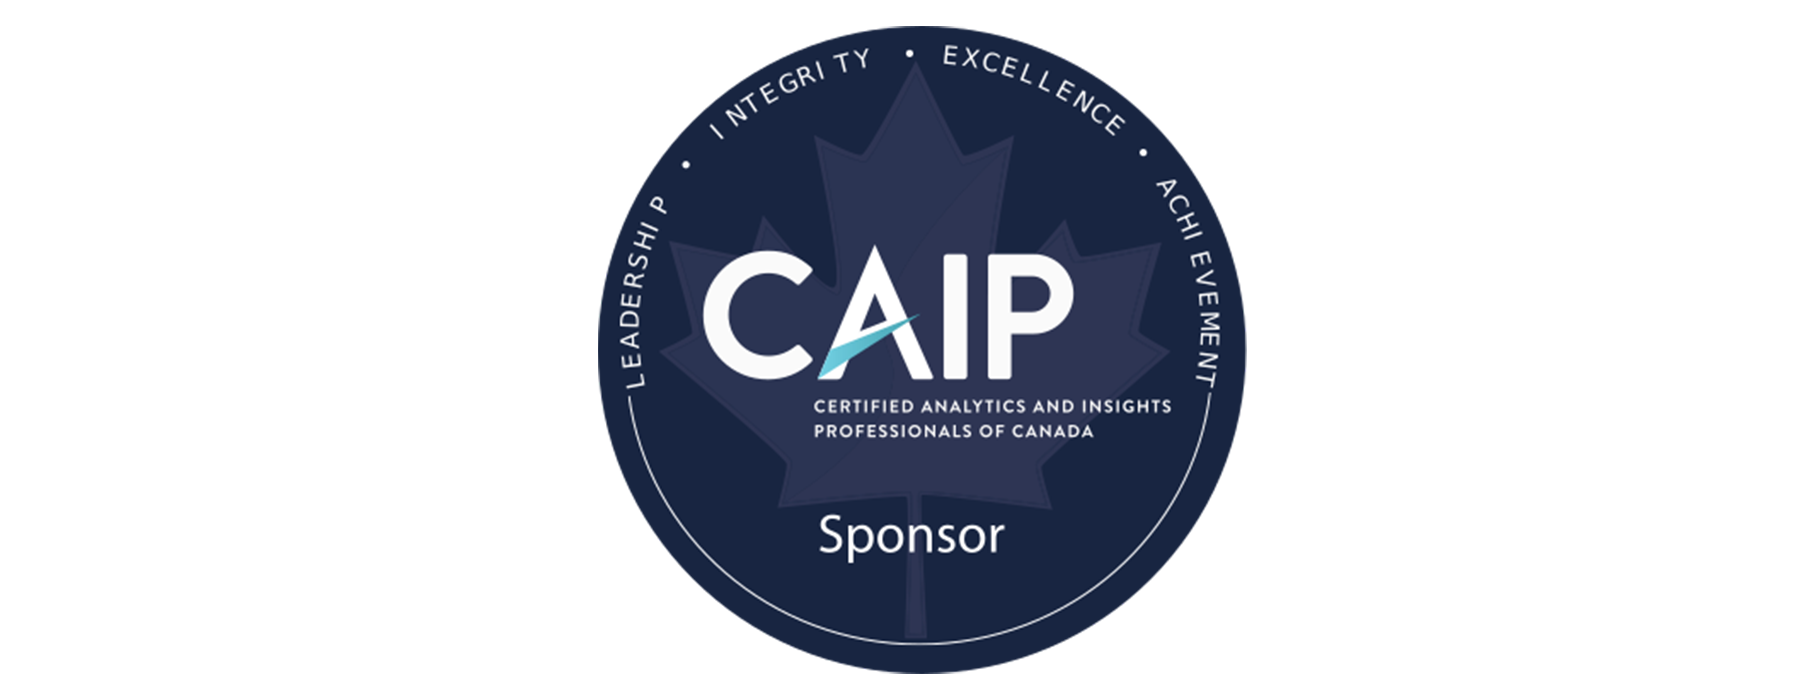 Certified Analytics And Insights Professionals of Canada Badge update